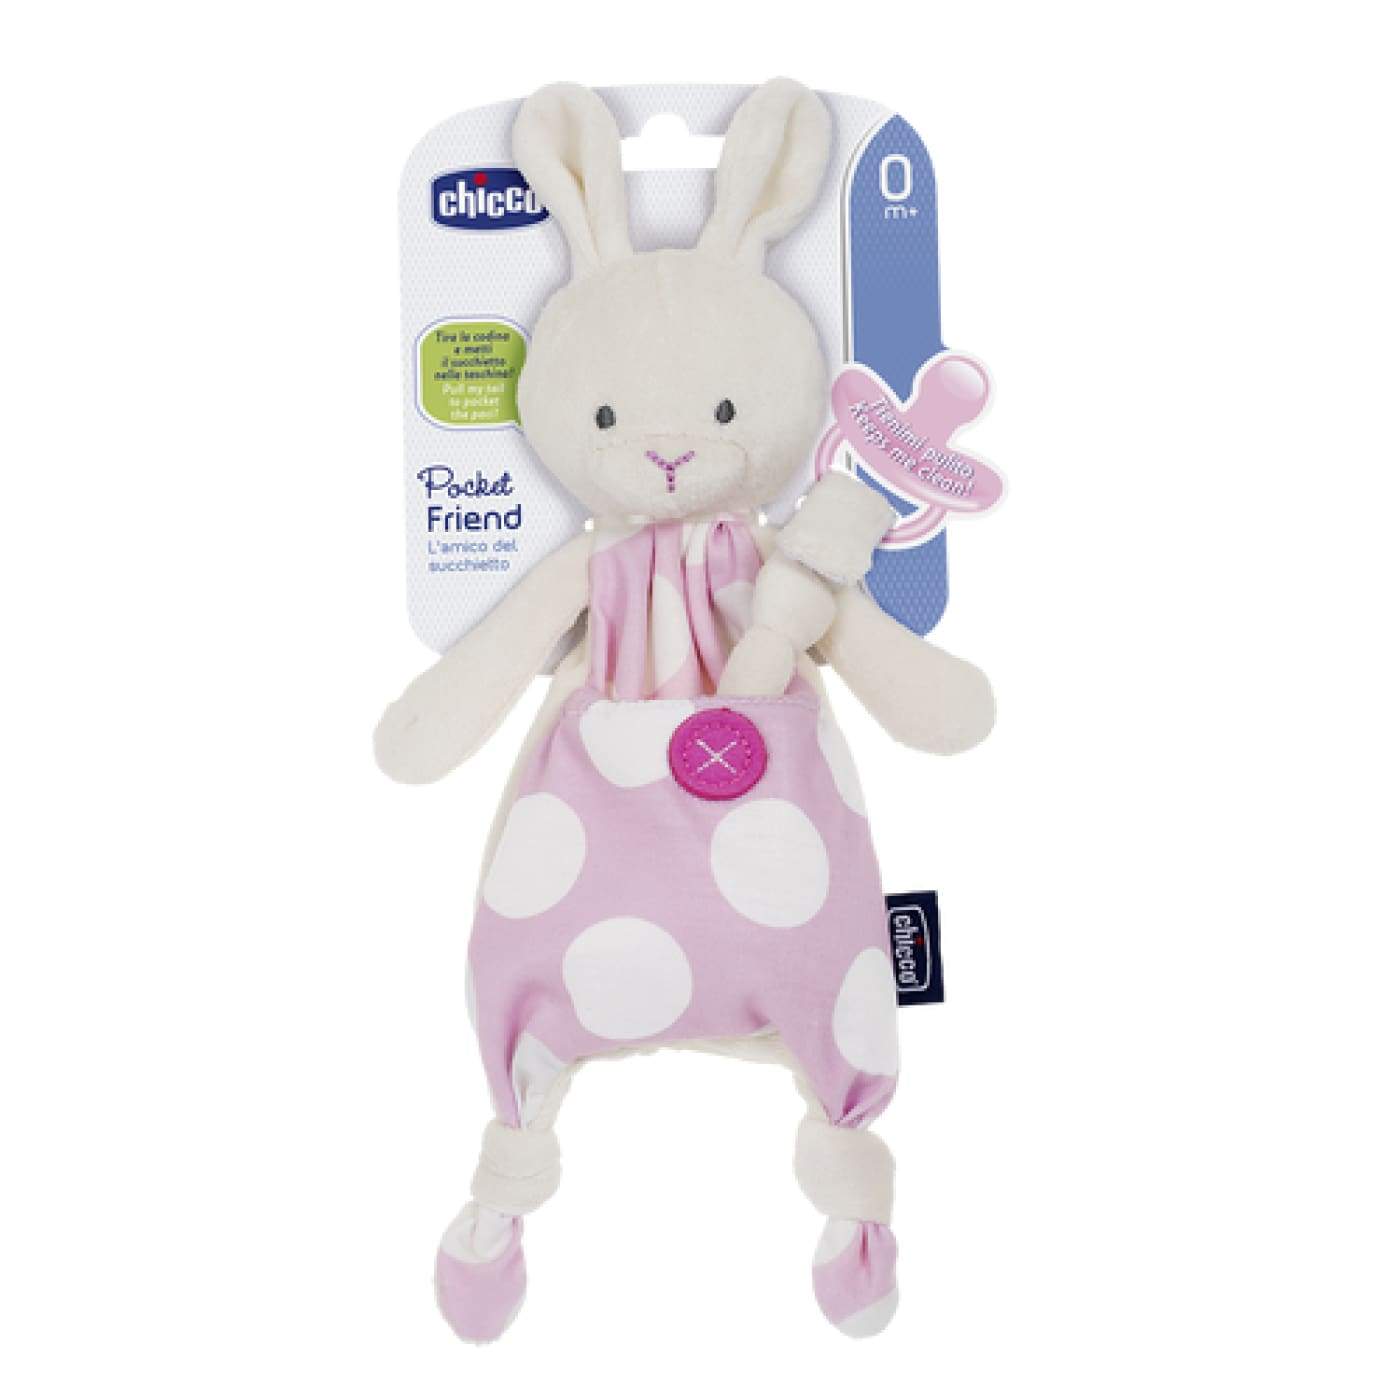 Chicco Pocket Friend - Pink - TOYS & PLAY - BLANKIES/COMFORTERS/RATTLES